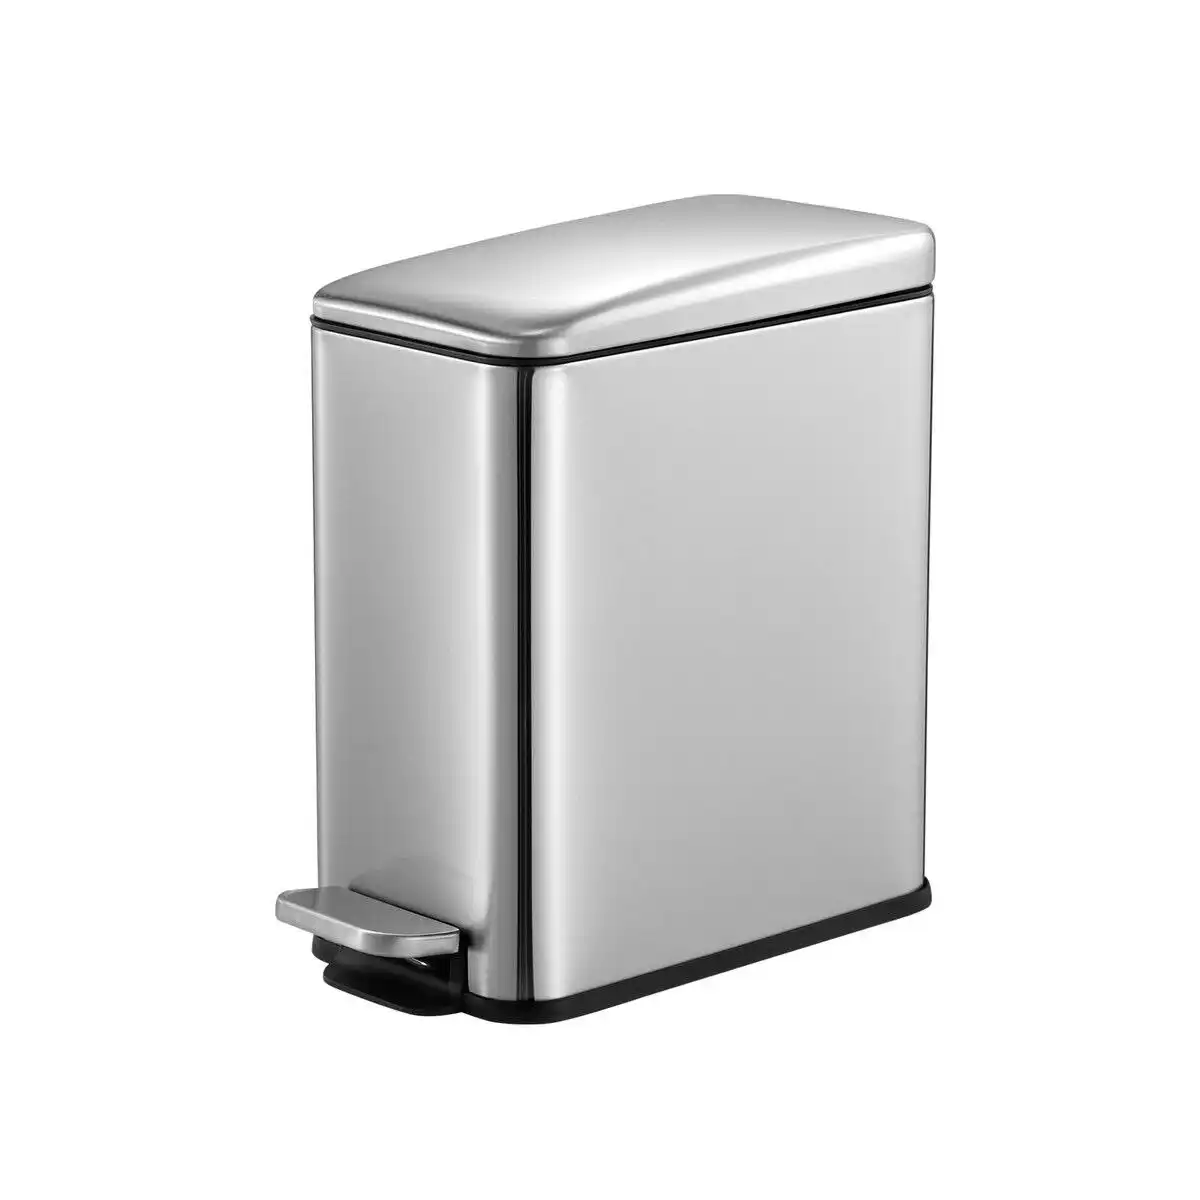 Maxkon Small Garbage Can Rubbish Pedal Bin Recycling Trash Waste Stainless Steel Rectangular Trashcan Soft Closing Kitchen House Indoor 5L